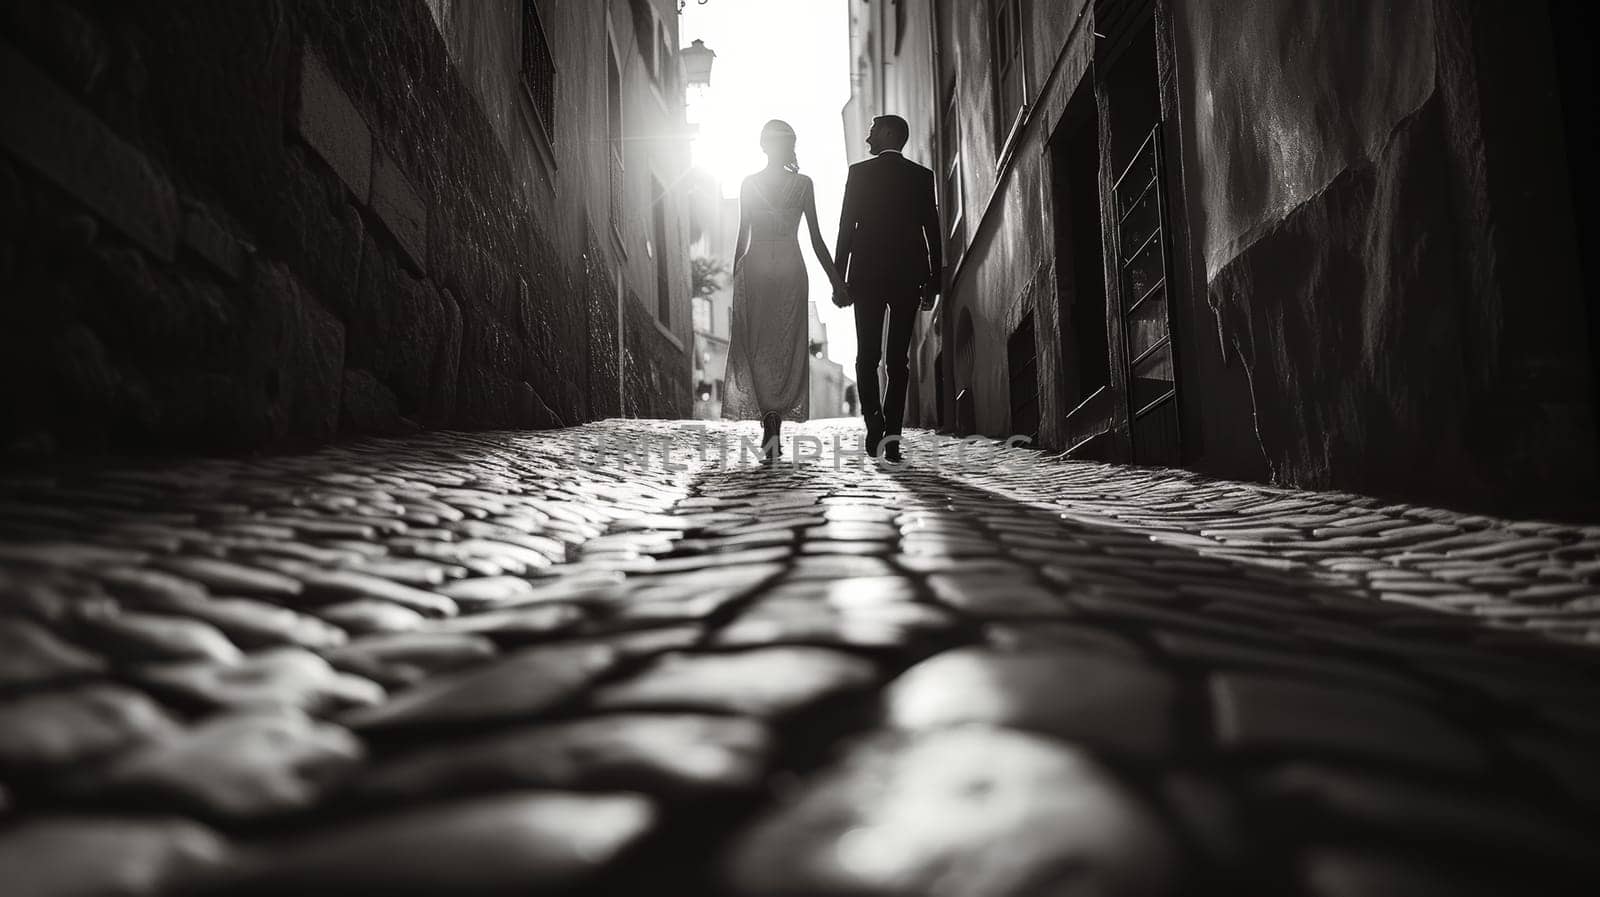 Silhouette of a couple walking hand in hand down a cobblestone alley at dusk, emanating romantic atmosphere. by sfinks